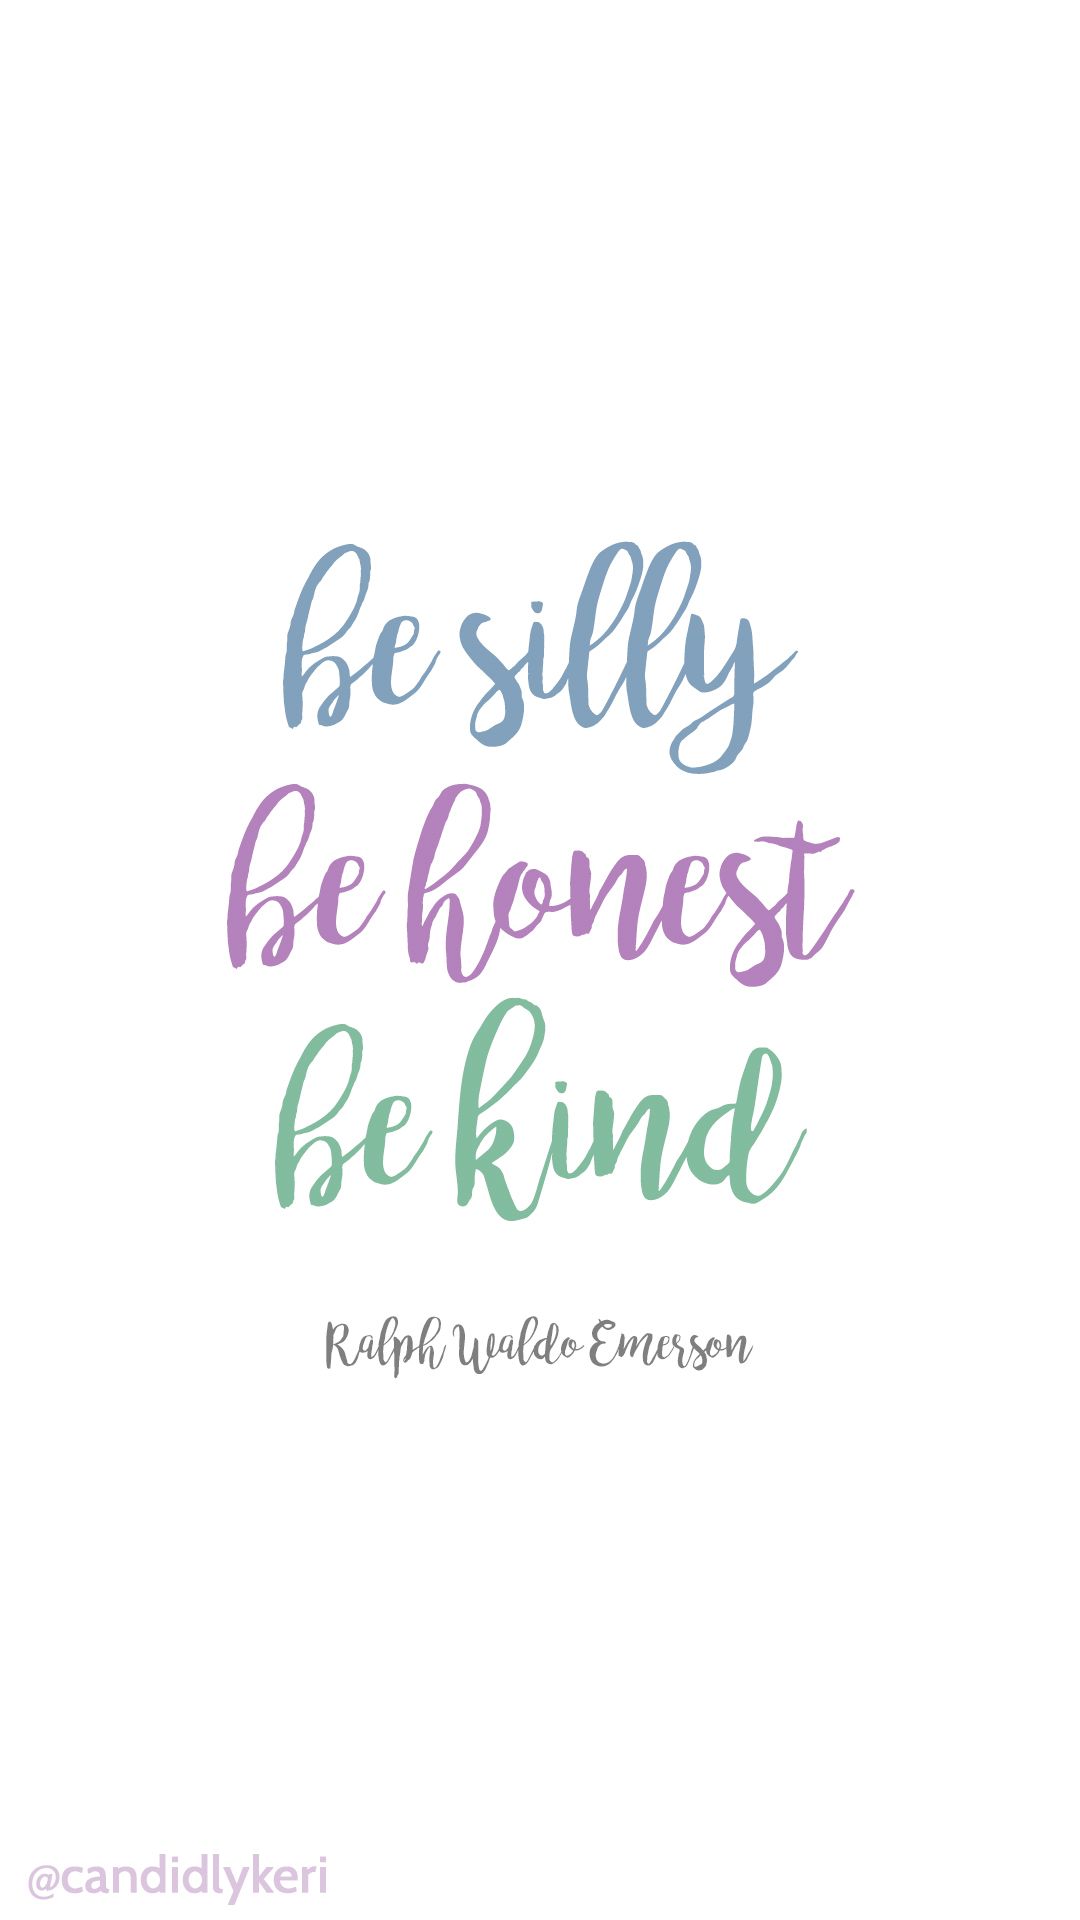 Be Silly Be Honest Be kind Emerson quote backgrounds wallpapers you